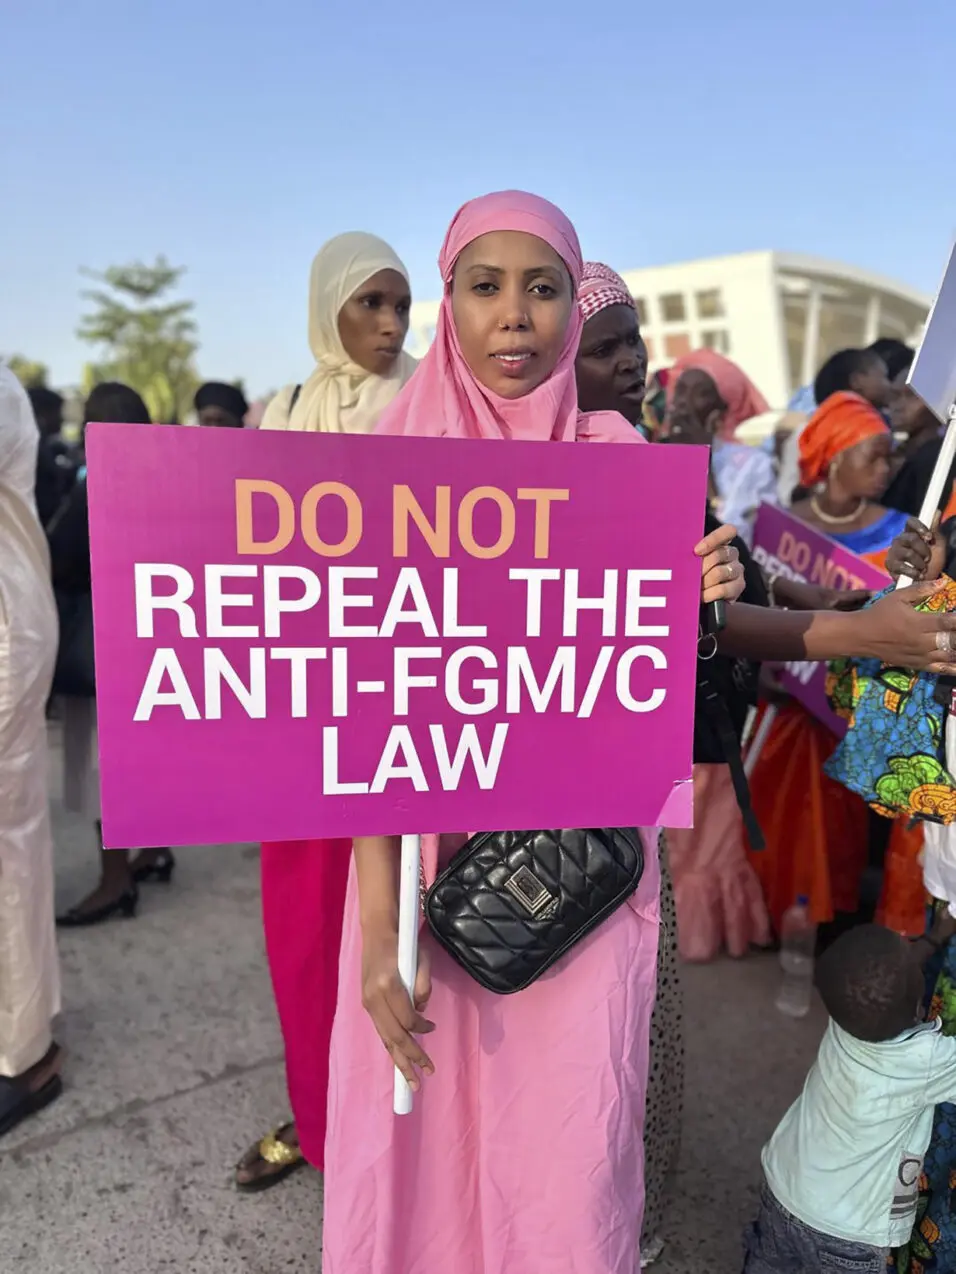 LA Post: In a global first, Gambia could reverse its ban on female genital cutting